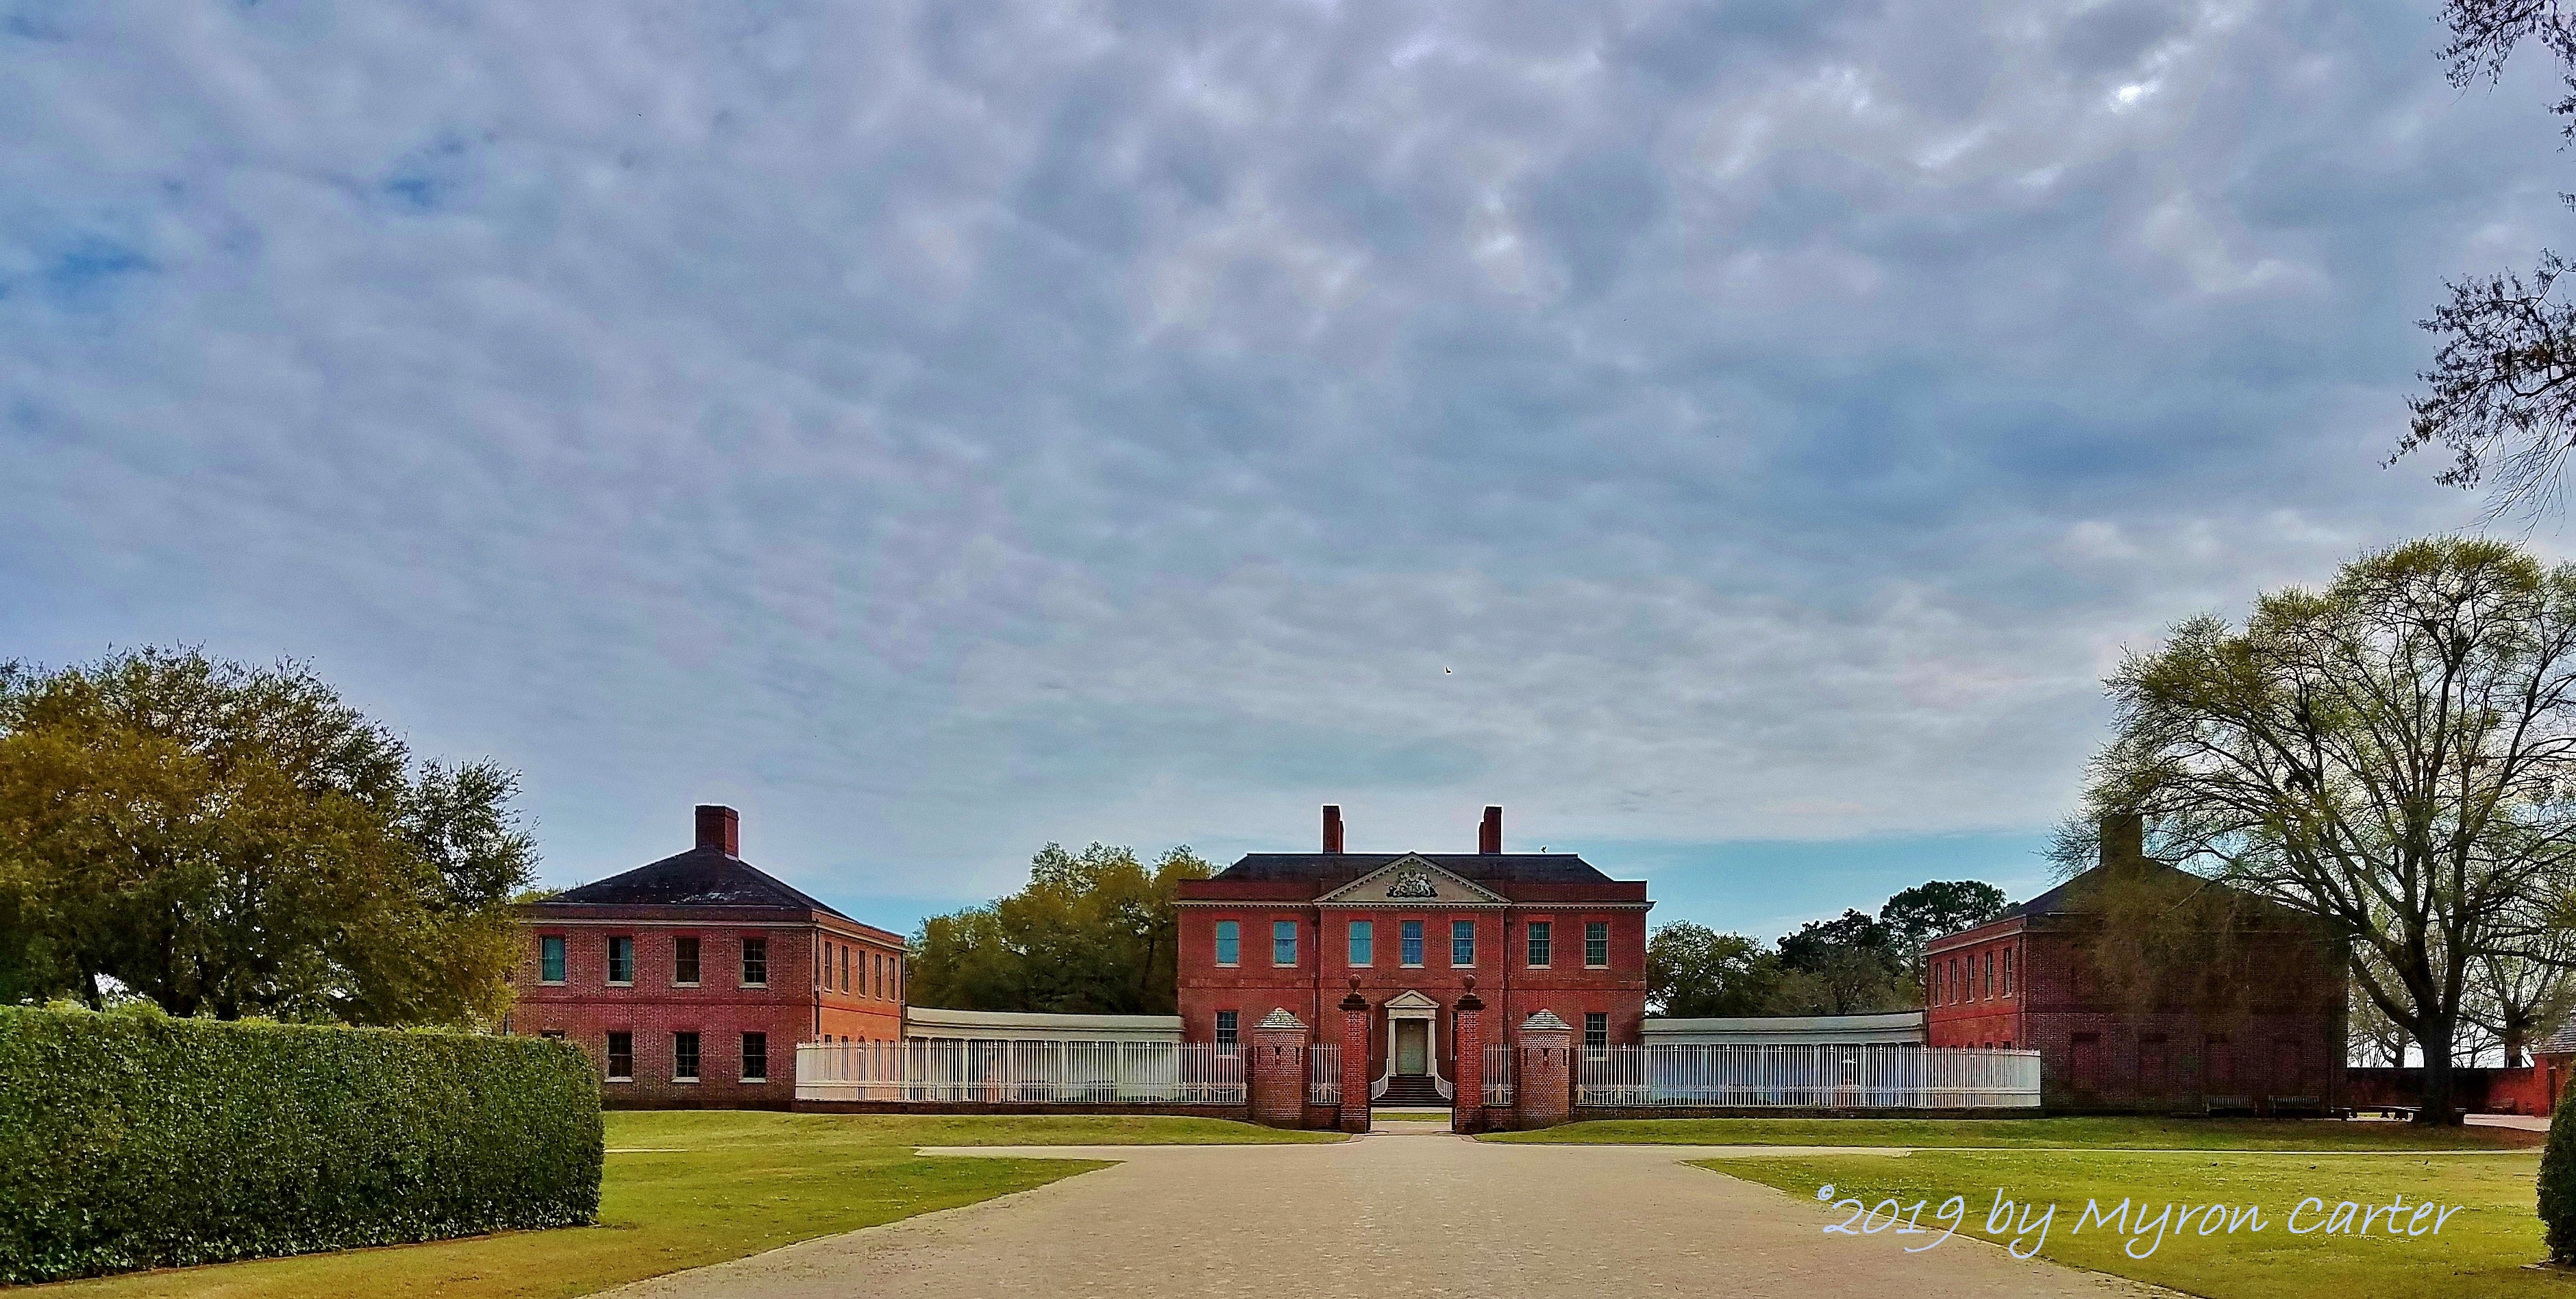 This is New Bern's biggest attraction--Tryon Palace (the Colonial Governor's mansion).  We did not spend much time at the campground, but why would we?  New Bern has so much to see and do.